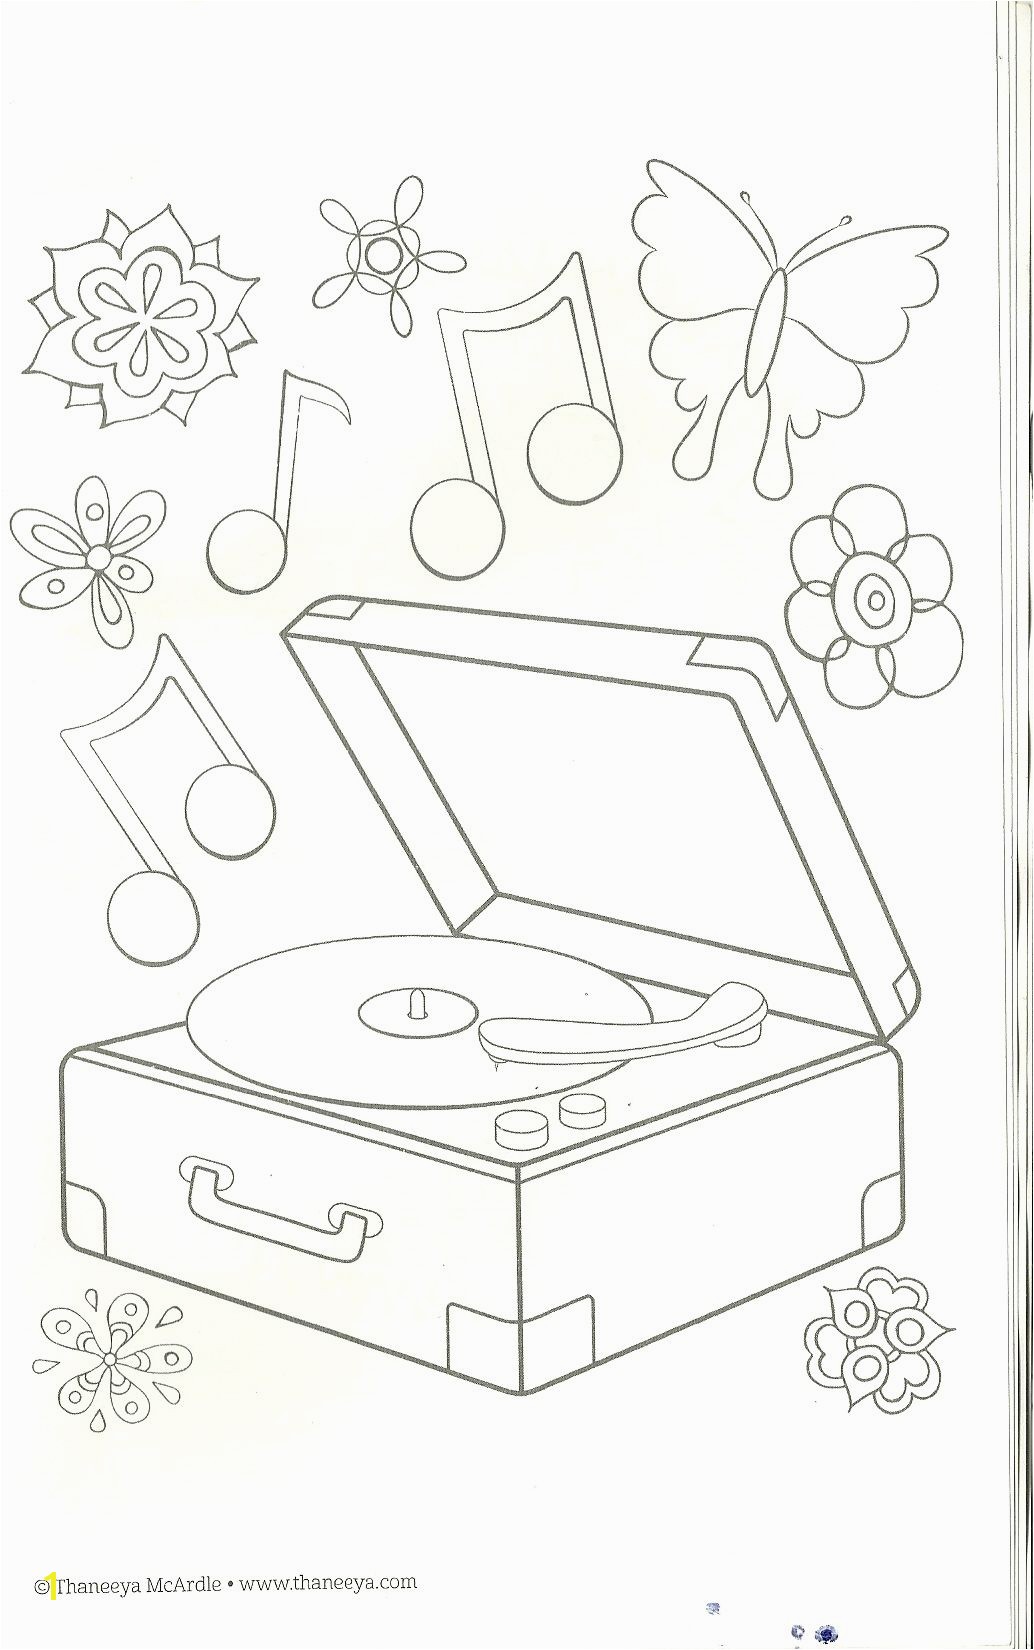 Dove Cameron Coloring Pages Record Player Coloring Page My Coloring Pages